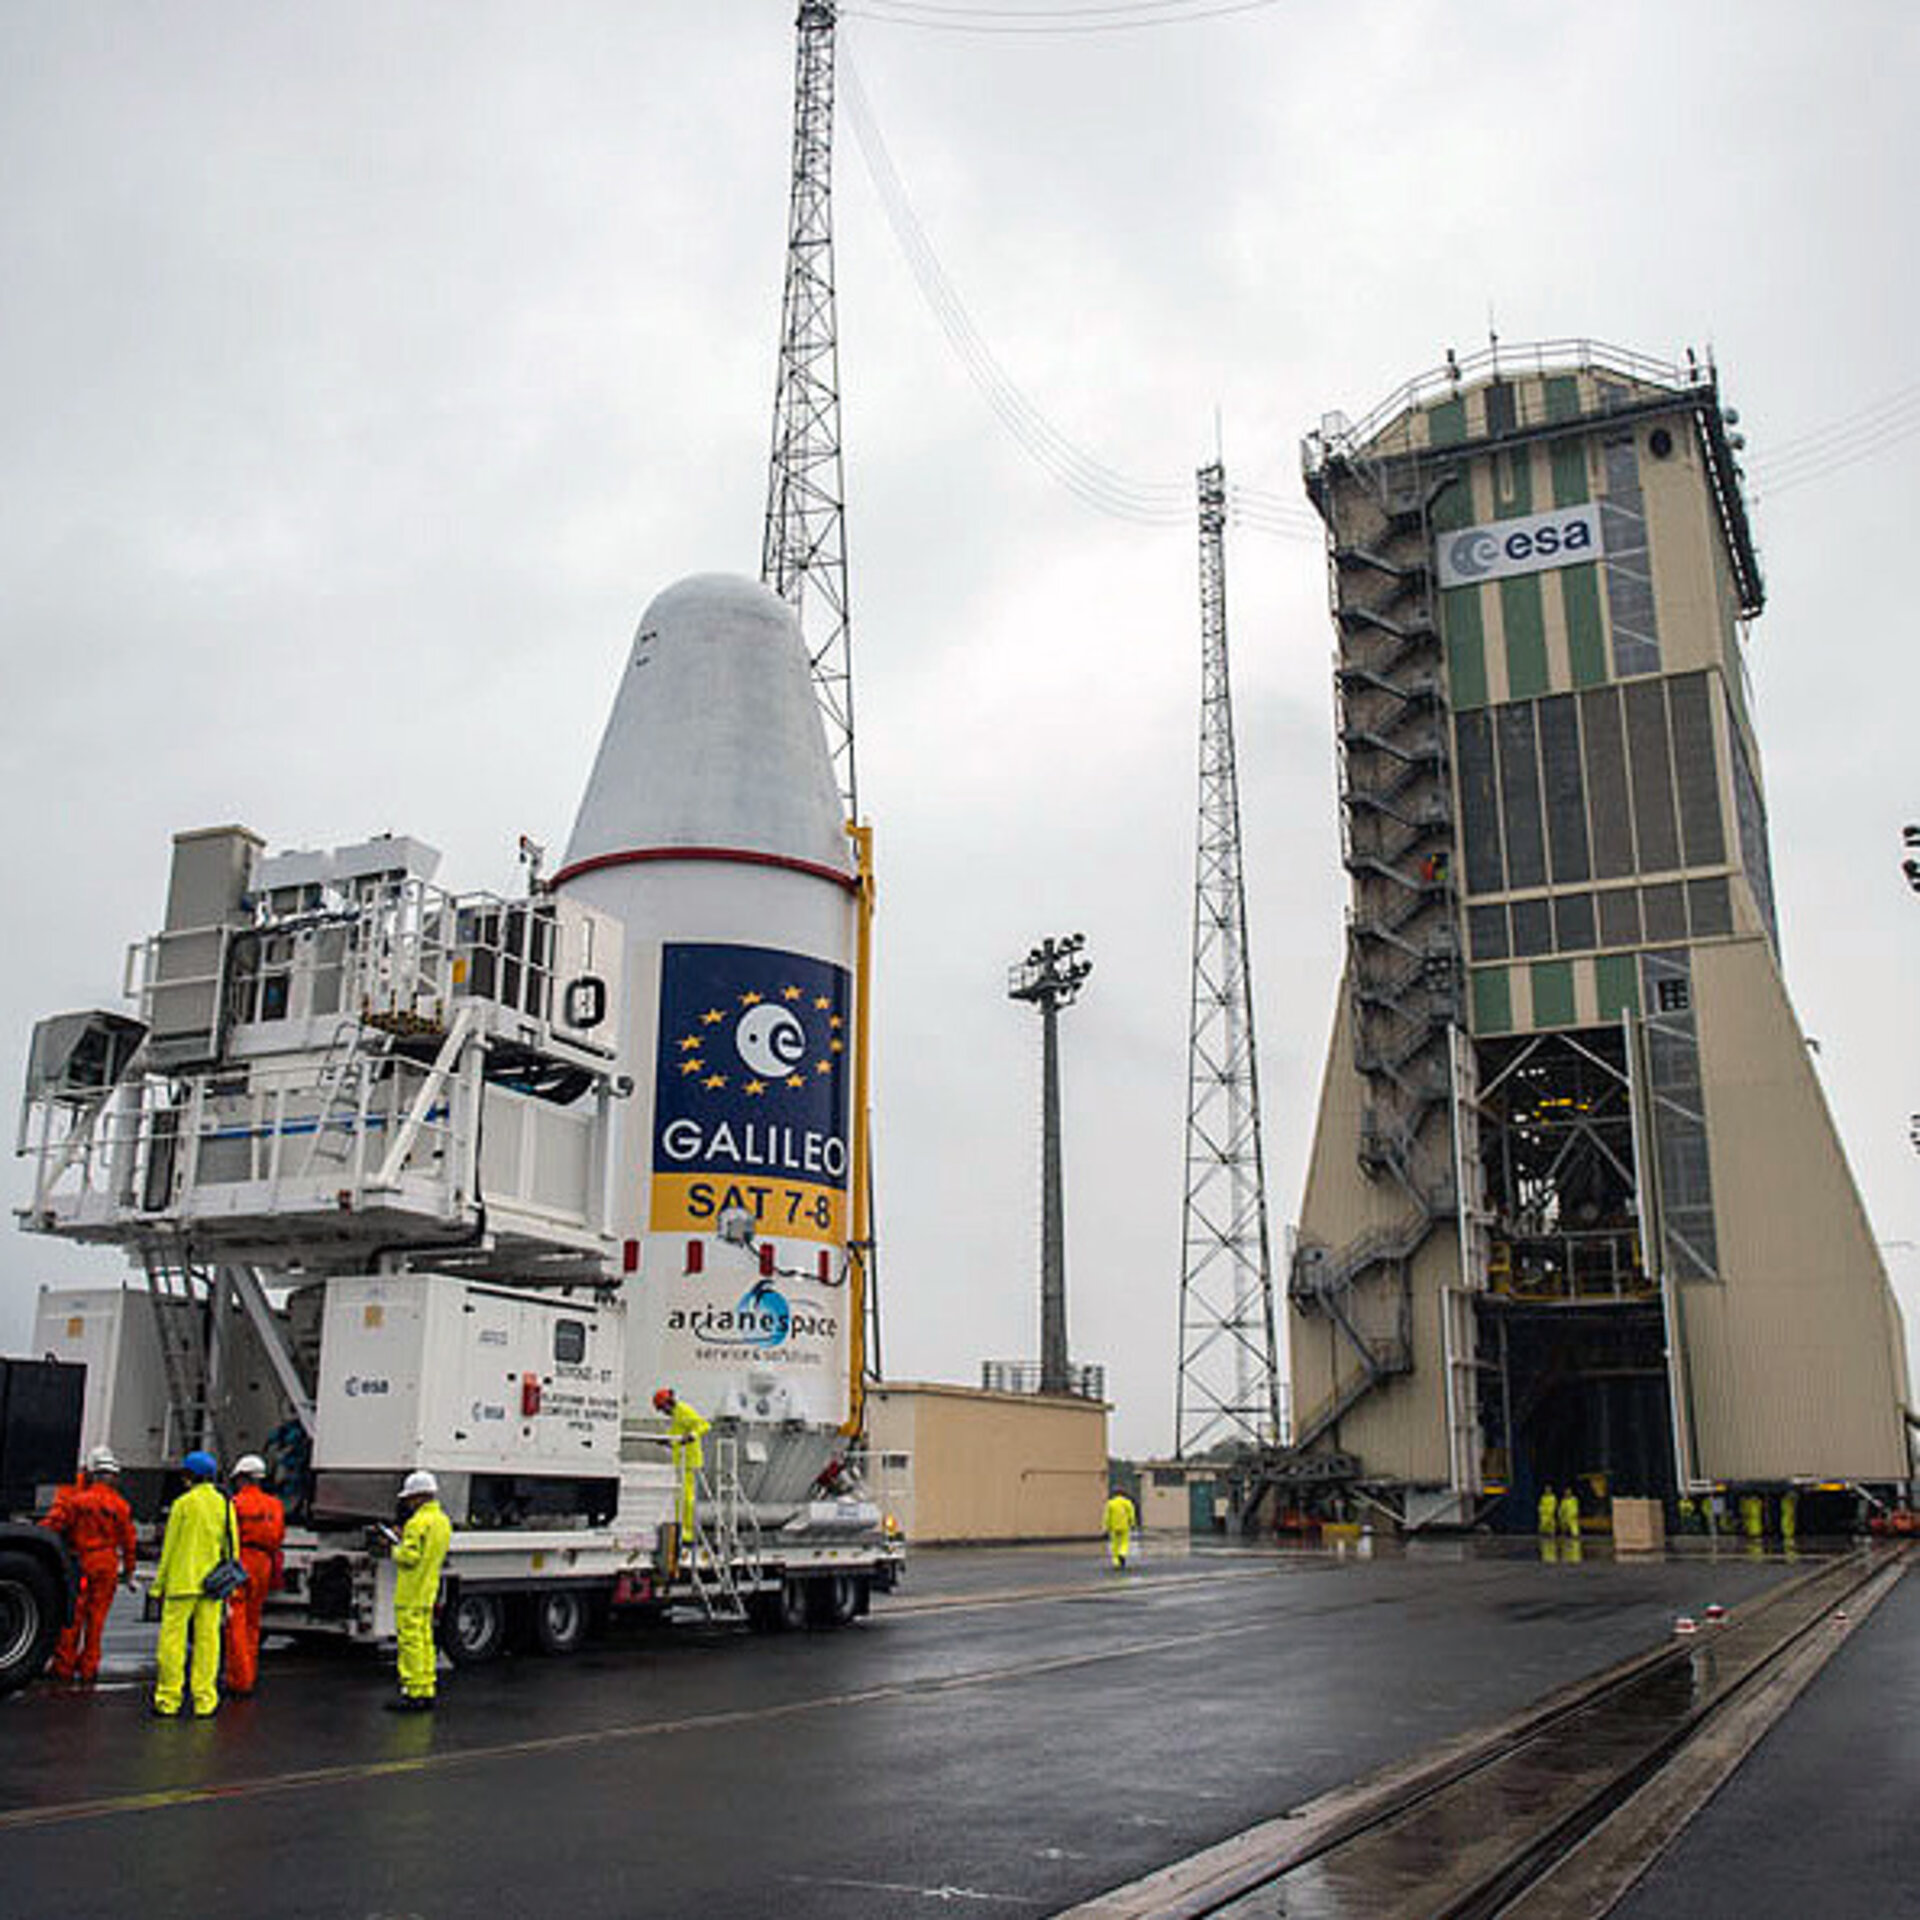 Galileos moved to launch pad